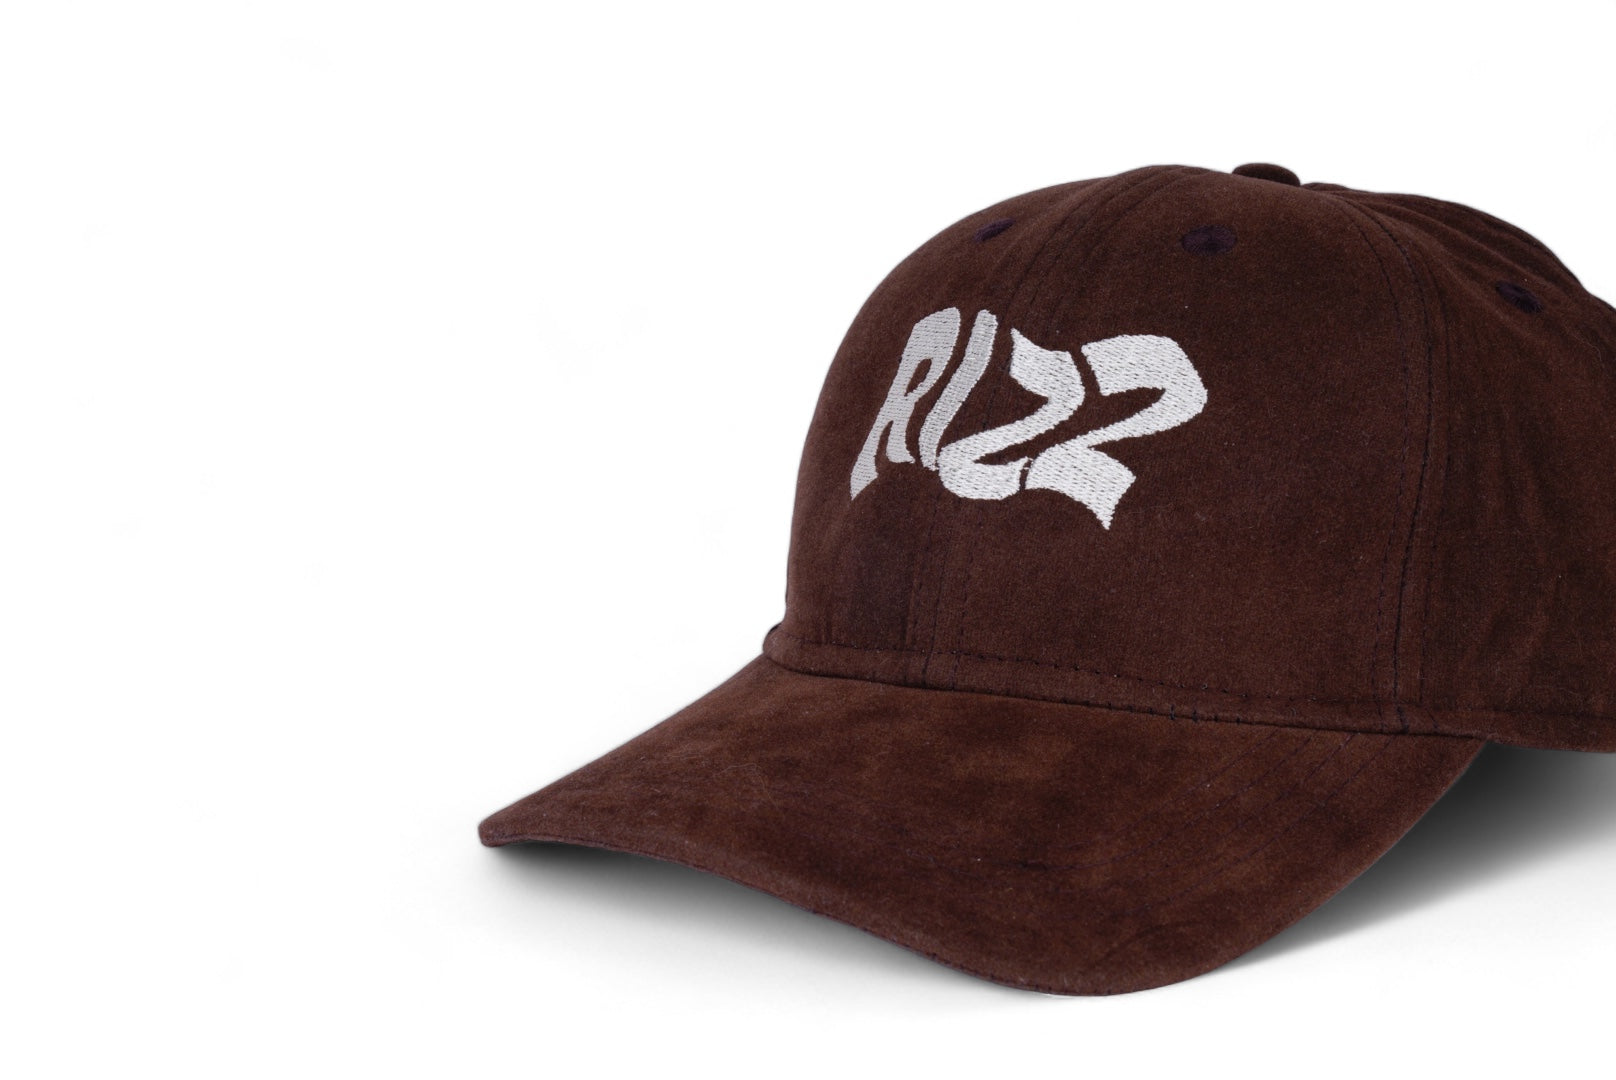 Stylish Brown snapback cap made with premium materials made to rock on all occasions, available at Cop Underdog In-store and ready to ship.